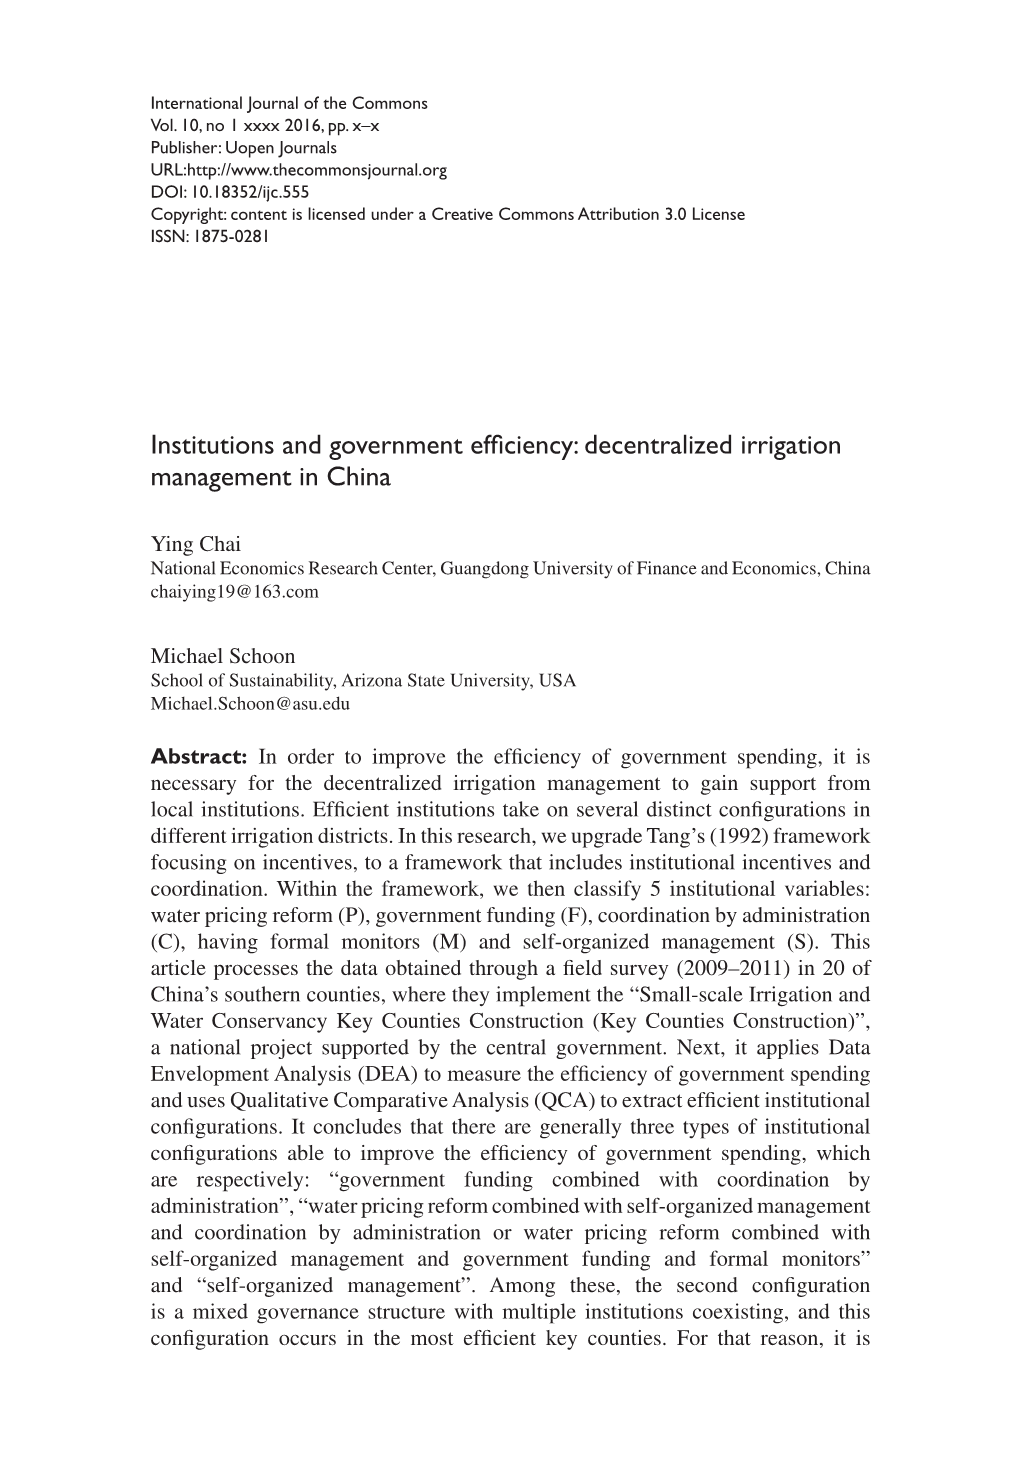 Institutions and Government Efficiency: Decentralized Irrigation Management in China